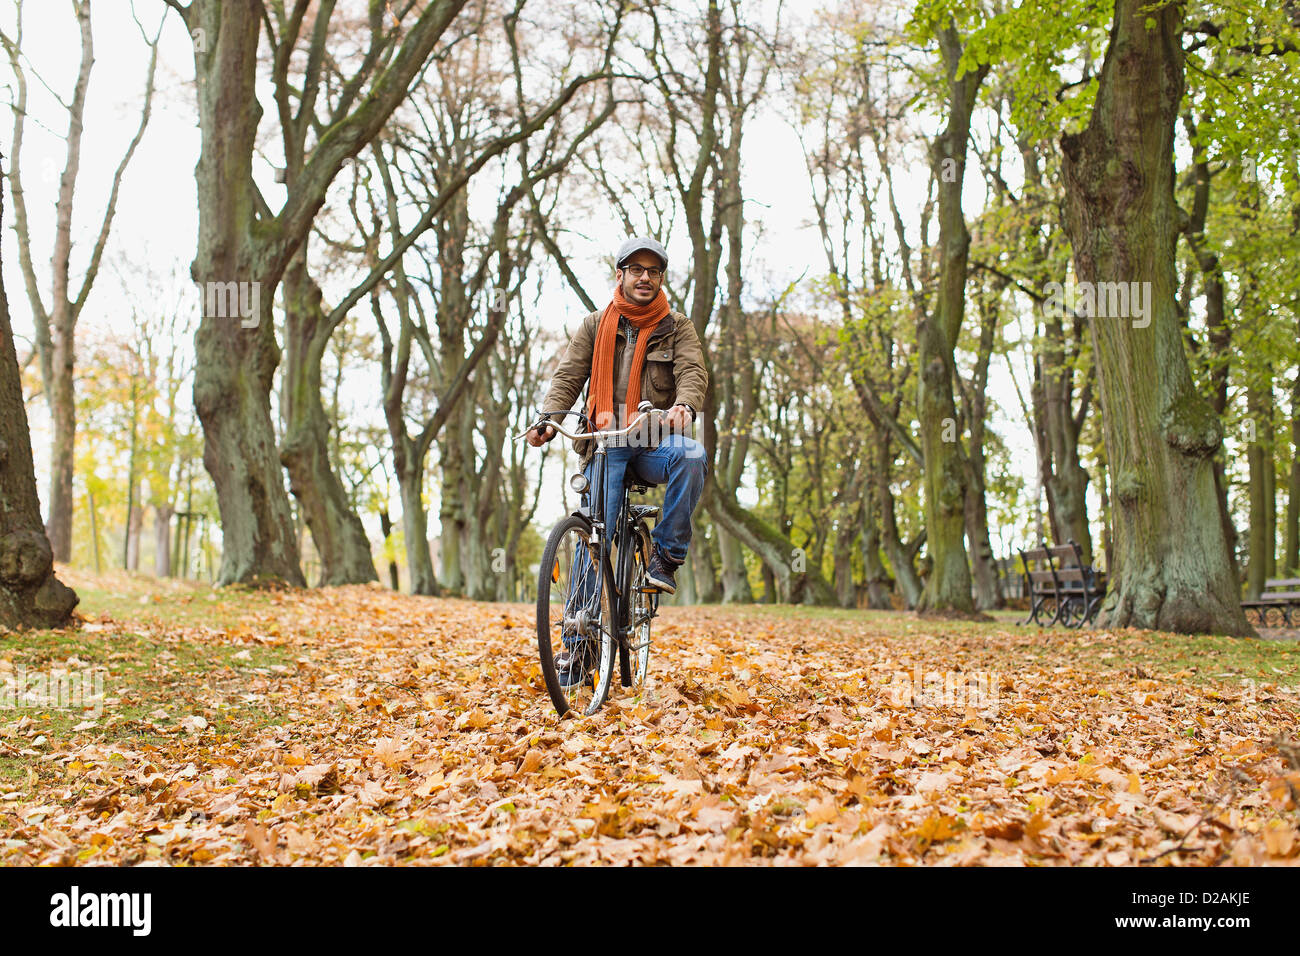 Man riding bicycle in park Stock Photo